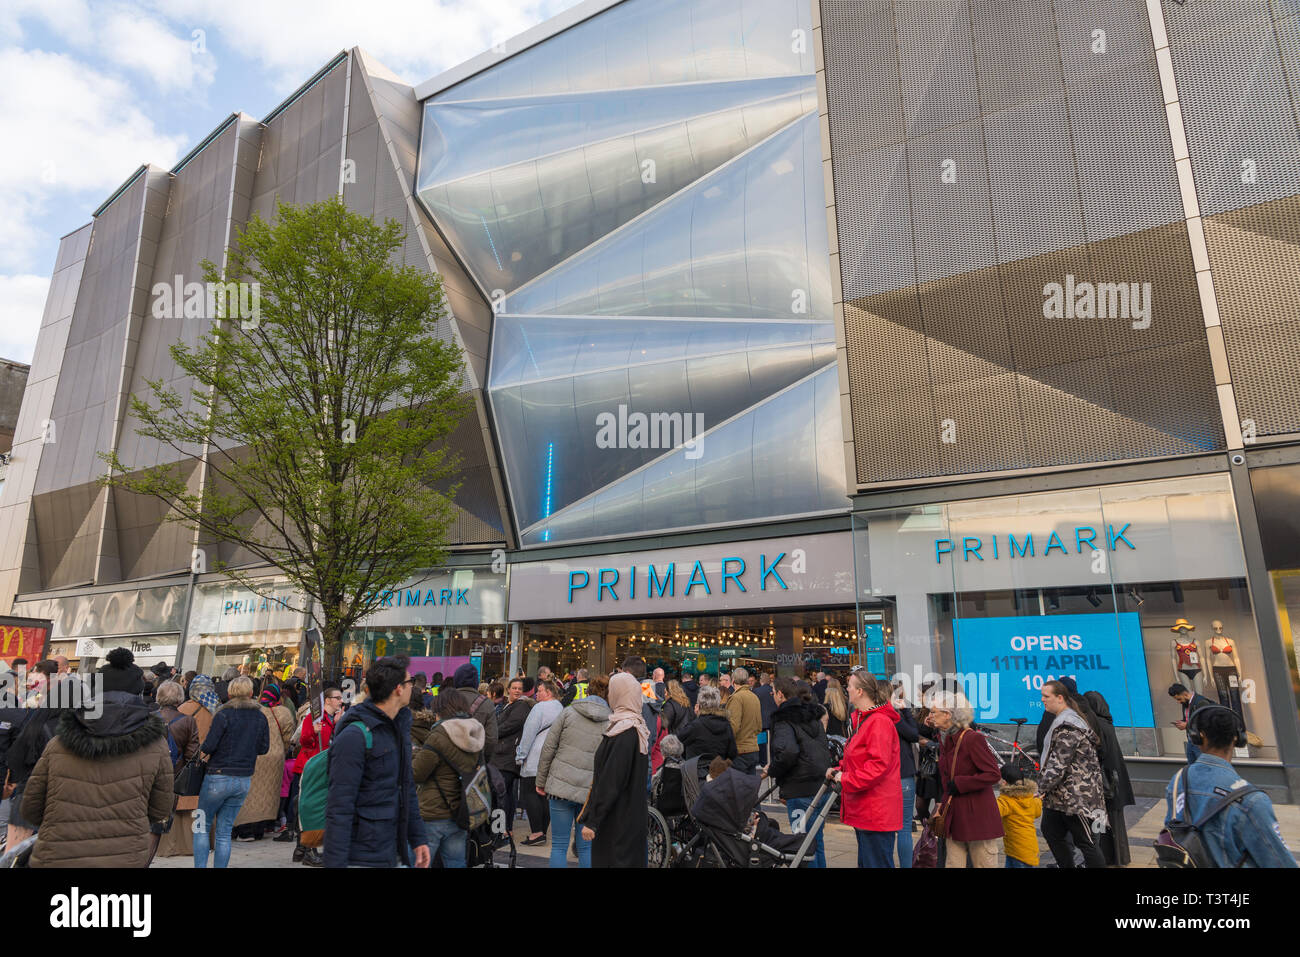 Crowds queuing outside the world's largest Primark store opened in Birmingham, UK on 11 April 2019. Stock Photo